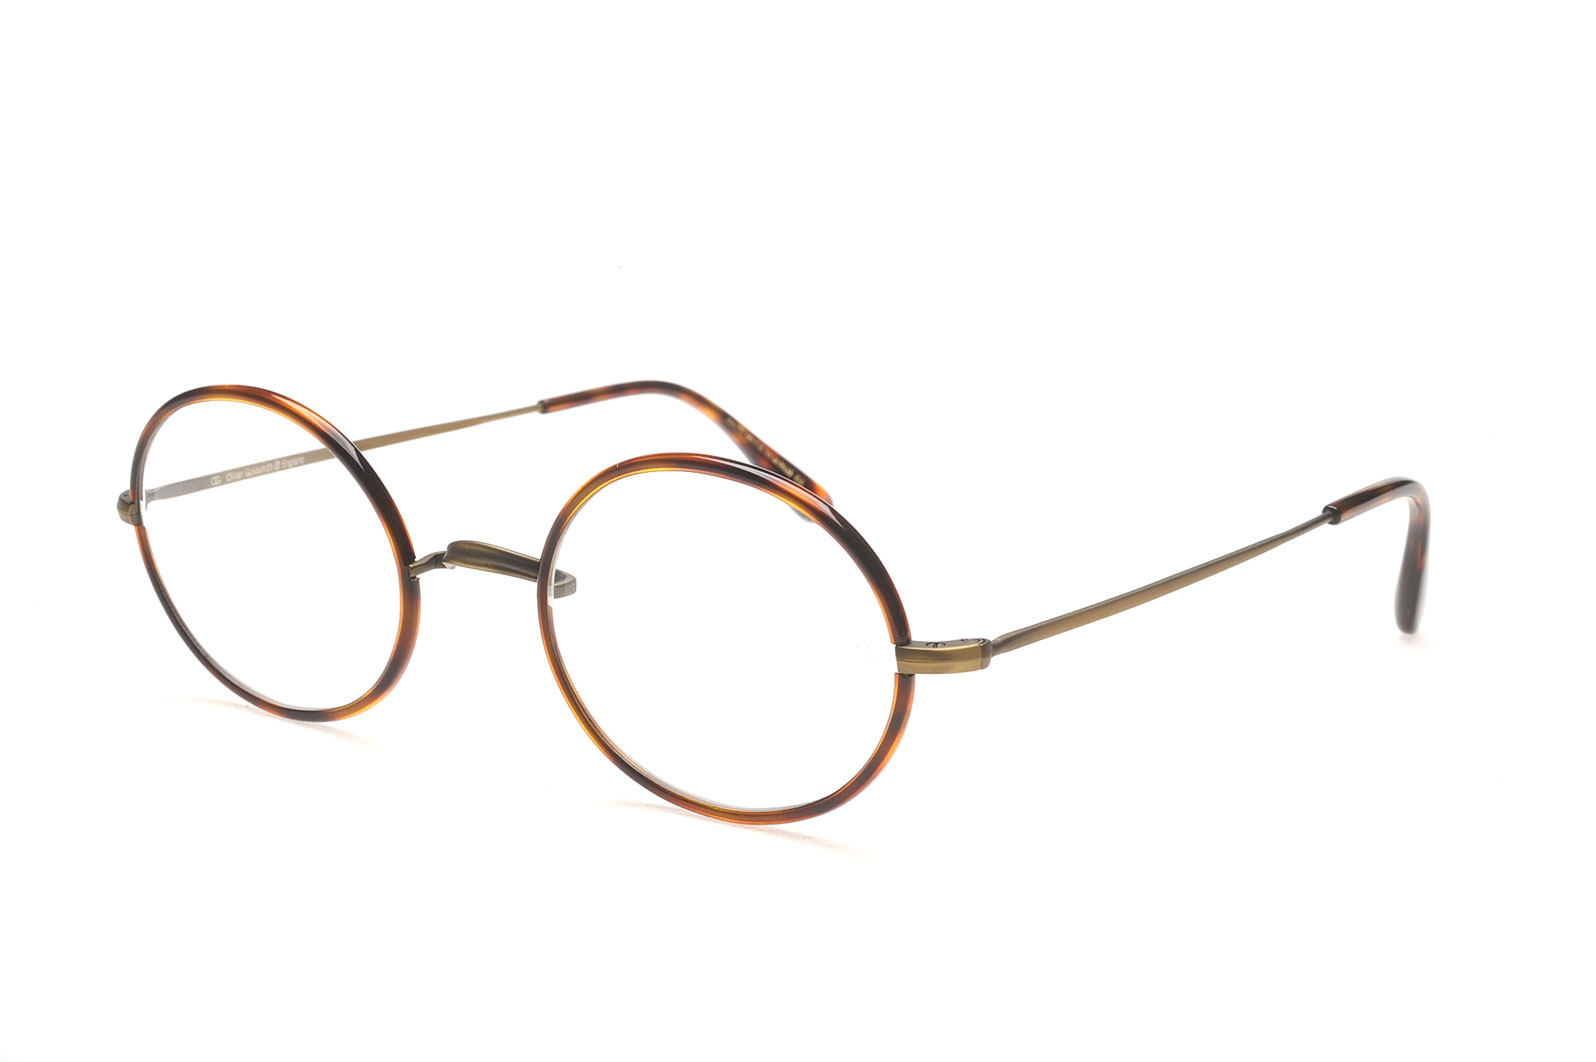 OVAL PRO — OLIVER GOLDSMITH SPECTACLES